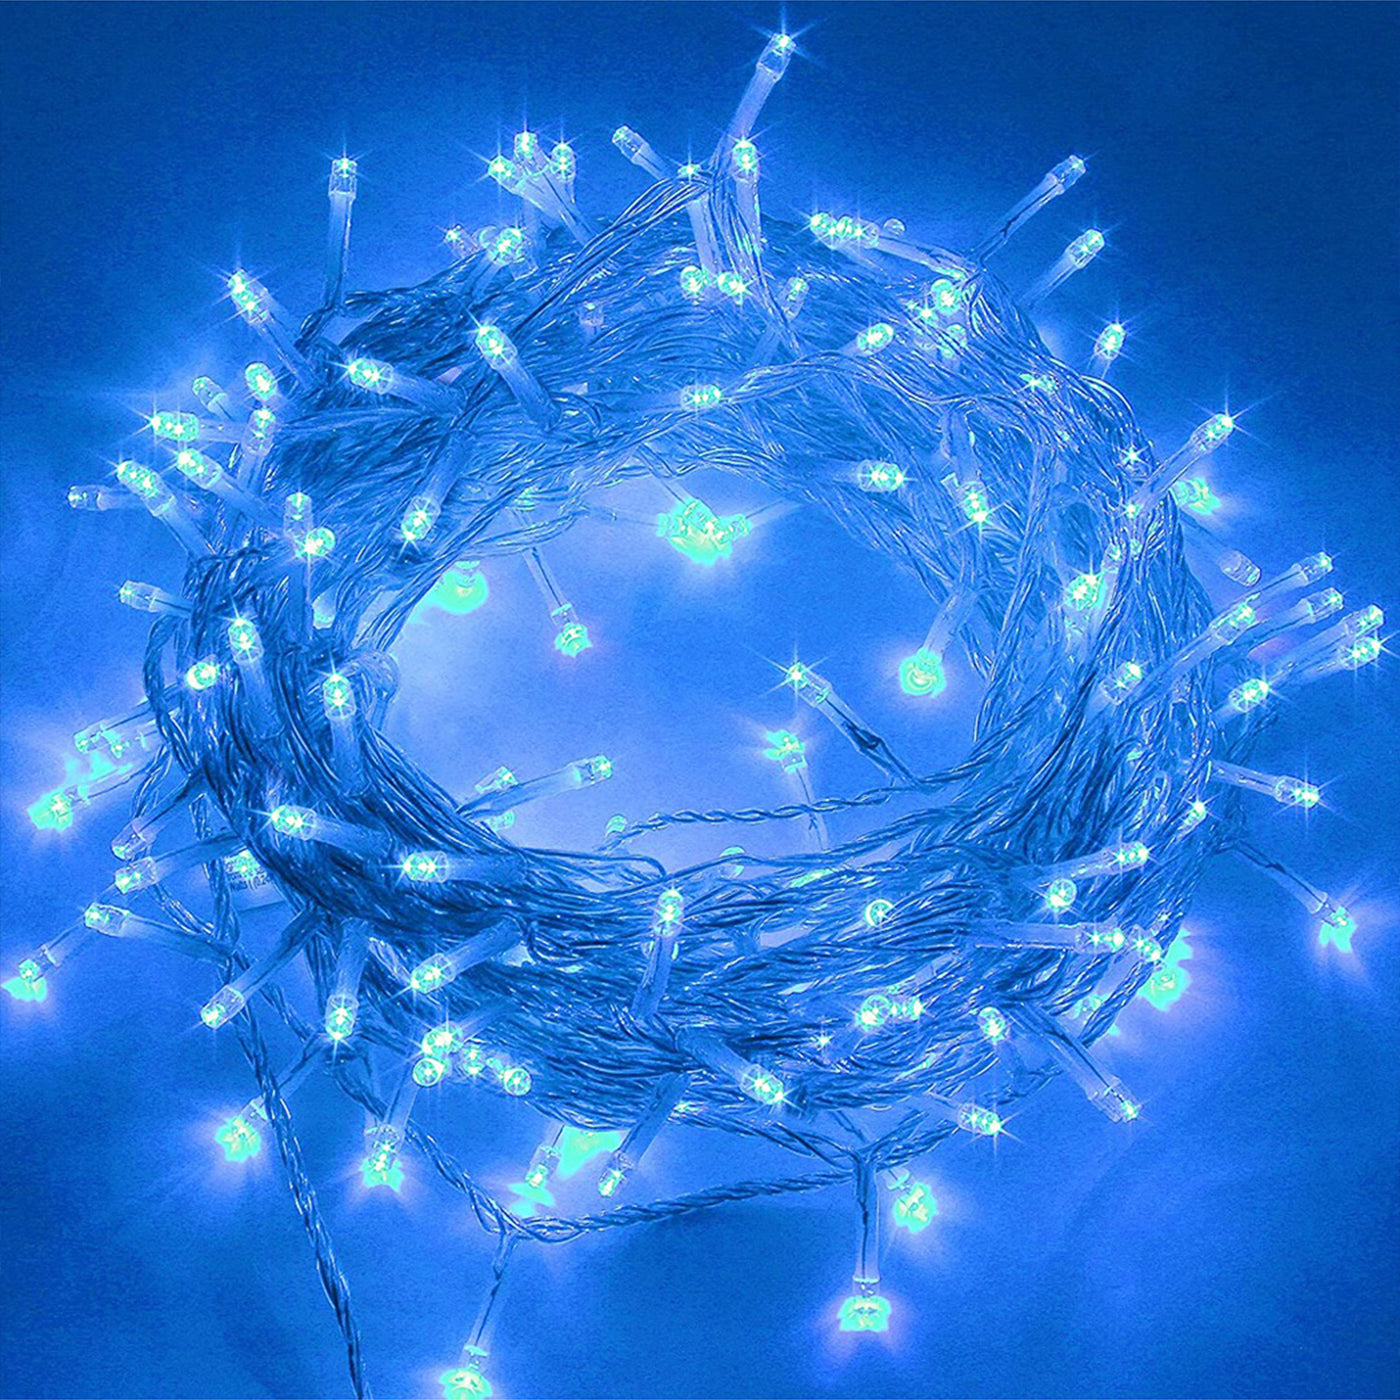 DecorTwist LED String Light for Home and Office Decor | Indoor & Outdoor Decorative Lights | Christmas | Diwali | Wedding | (Blue) 12 Meter Length |(Pack of 2)